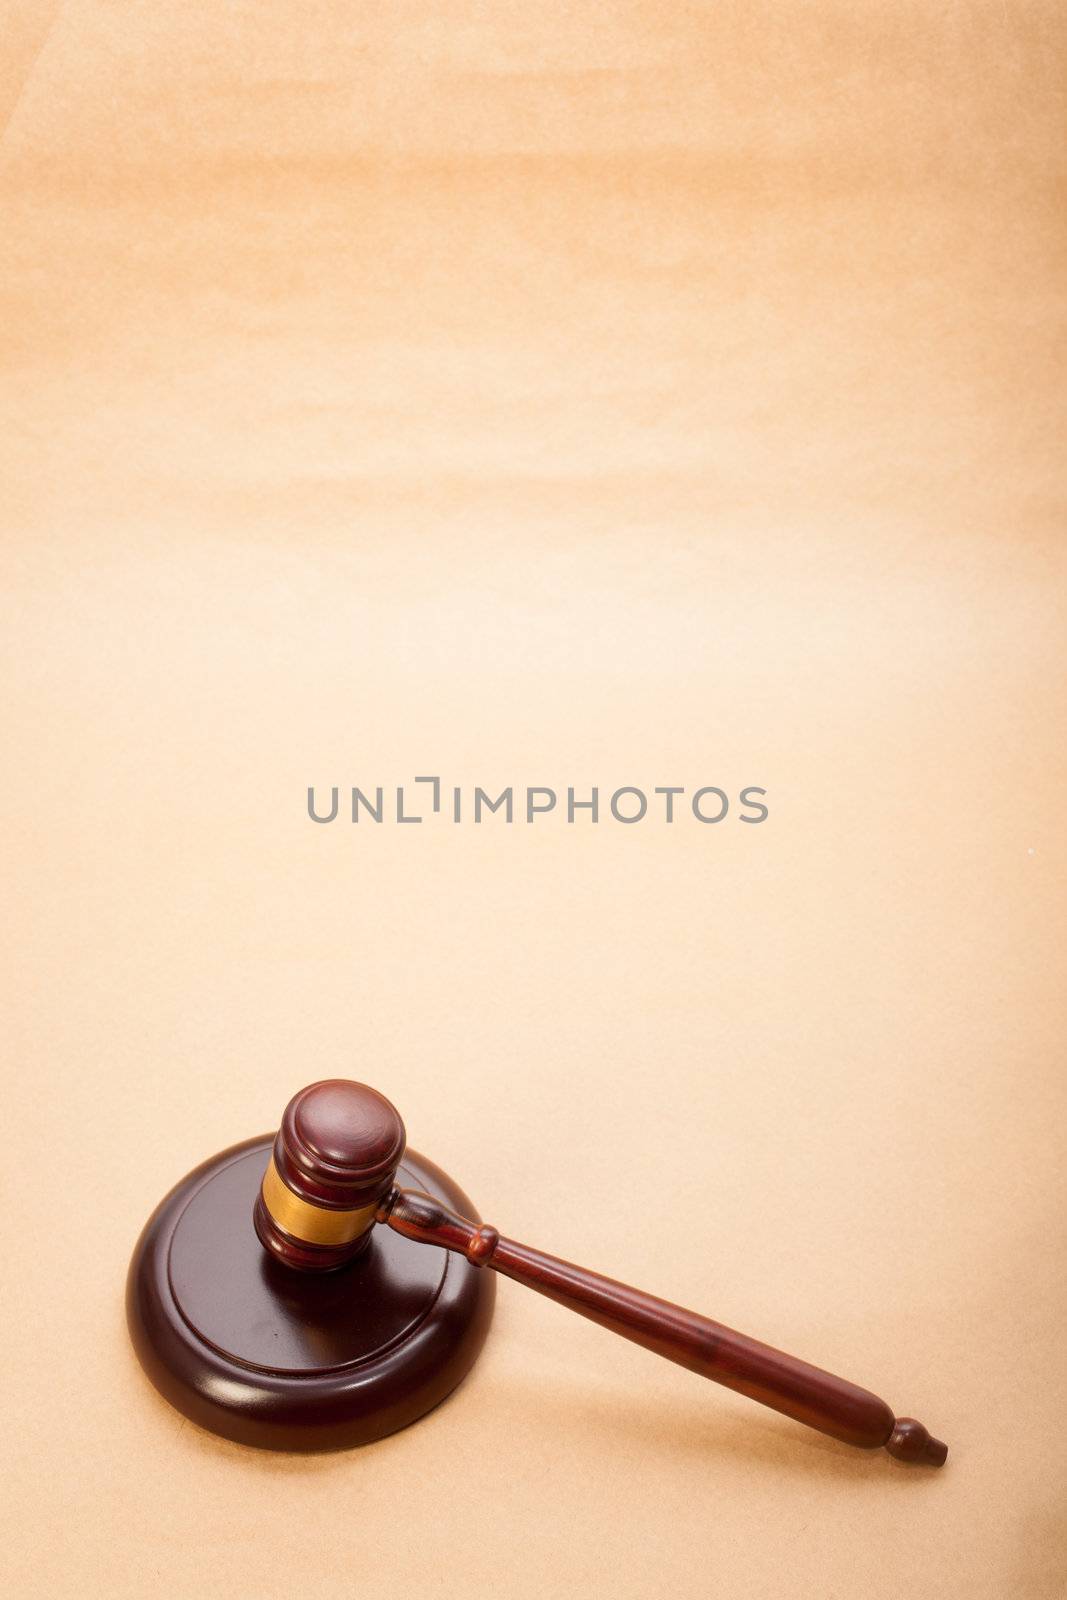 A wooden gavel and soundboard on a light brown background.